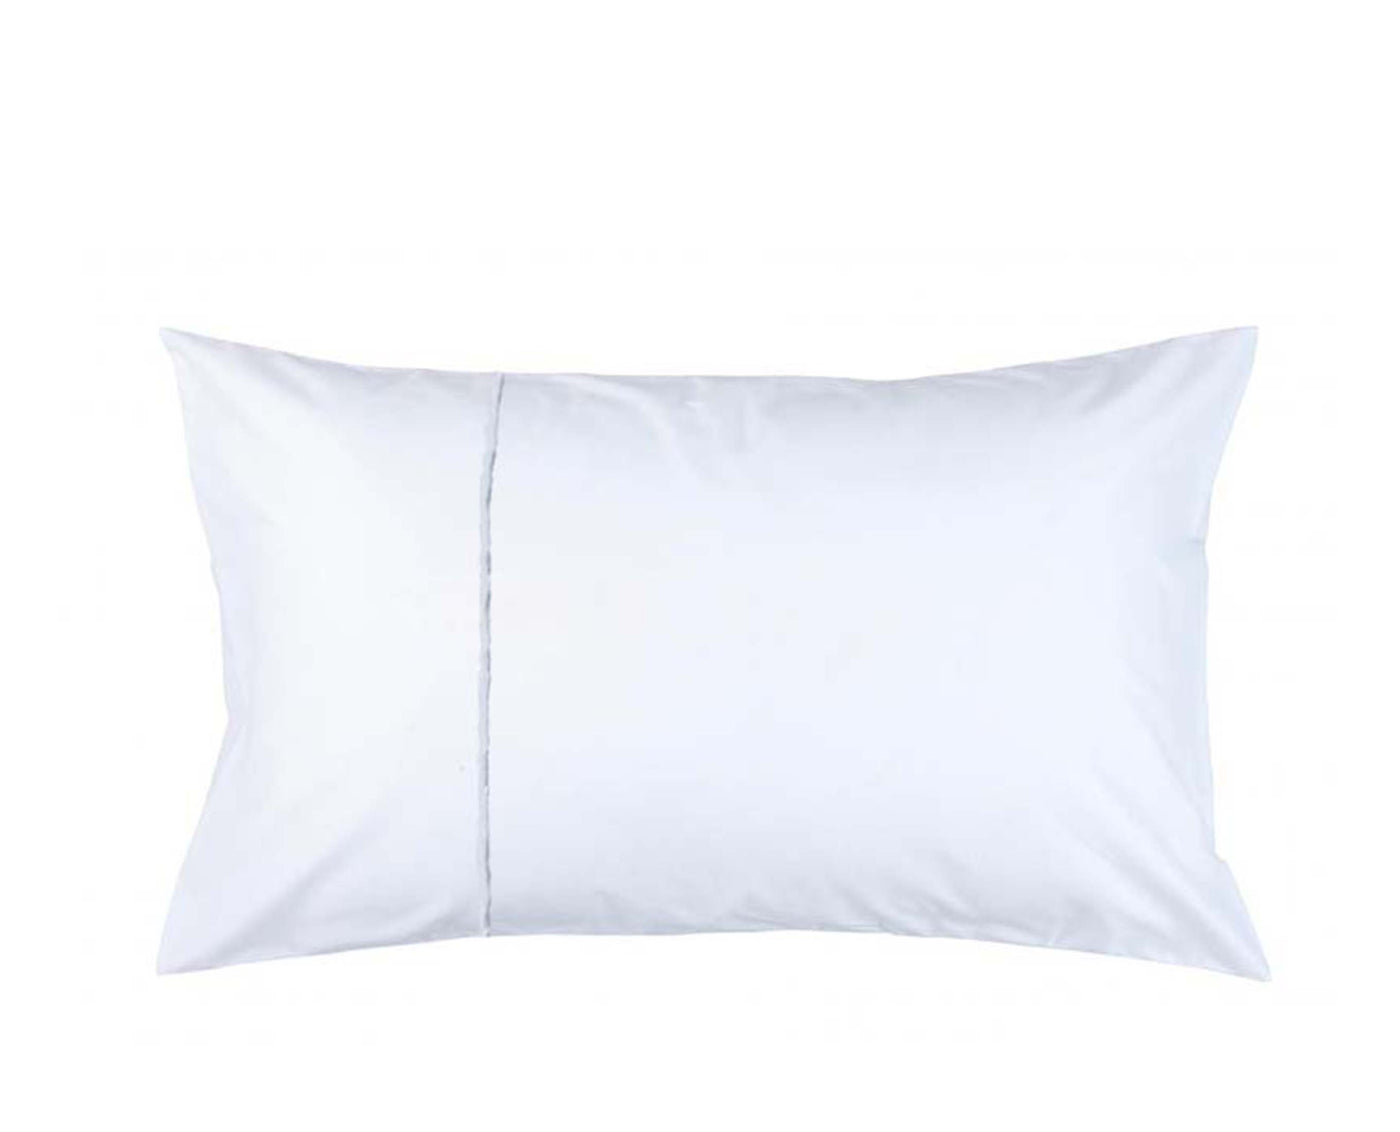 luxury down filled pillow with a pillow protector on top